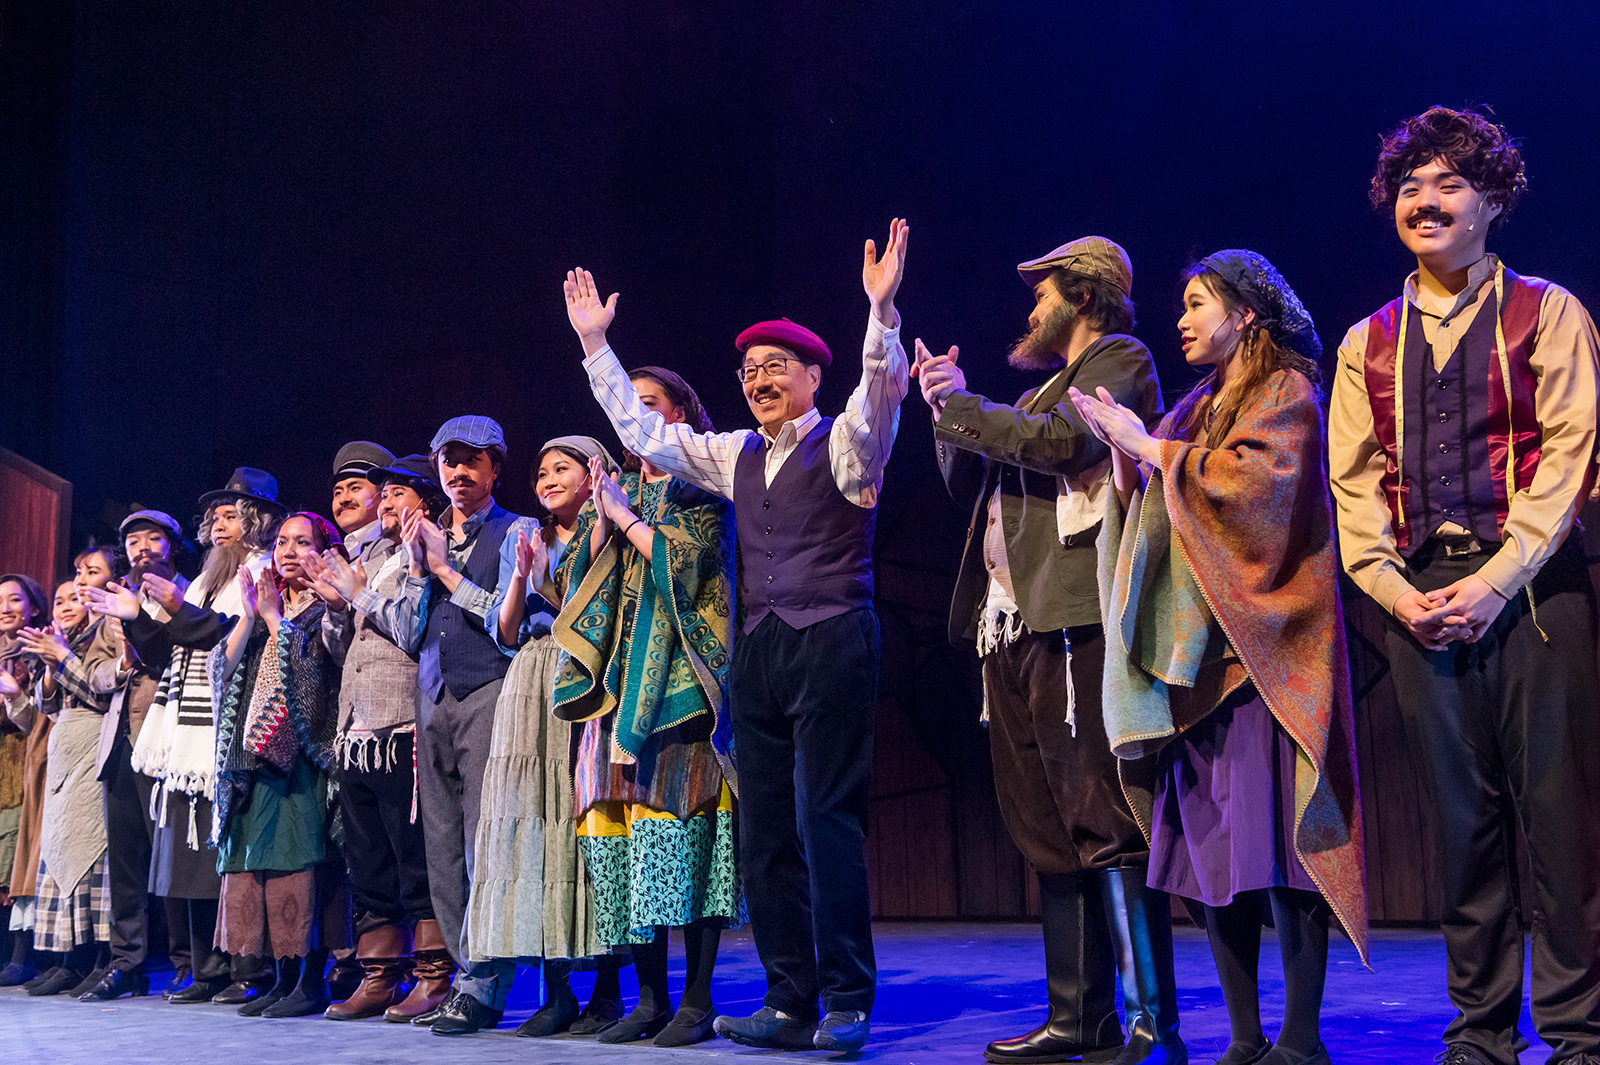 Students at CityU performed the famed Broadway musical Fiddler on the Roof from 18 to 21 November.